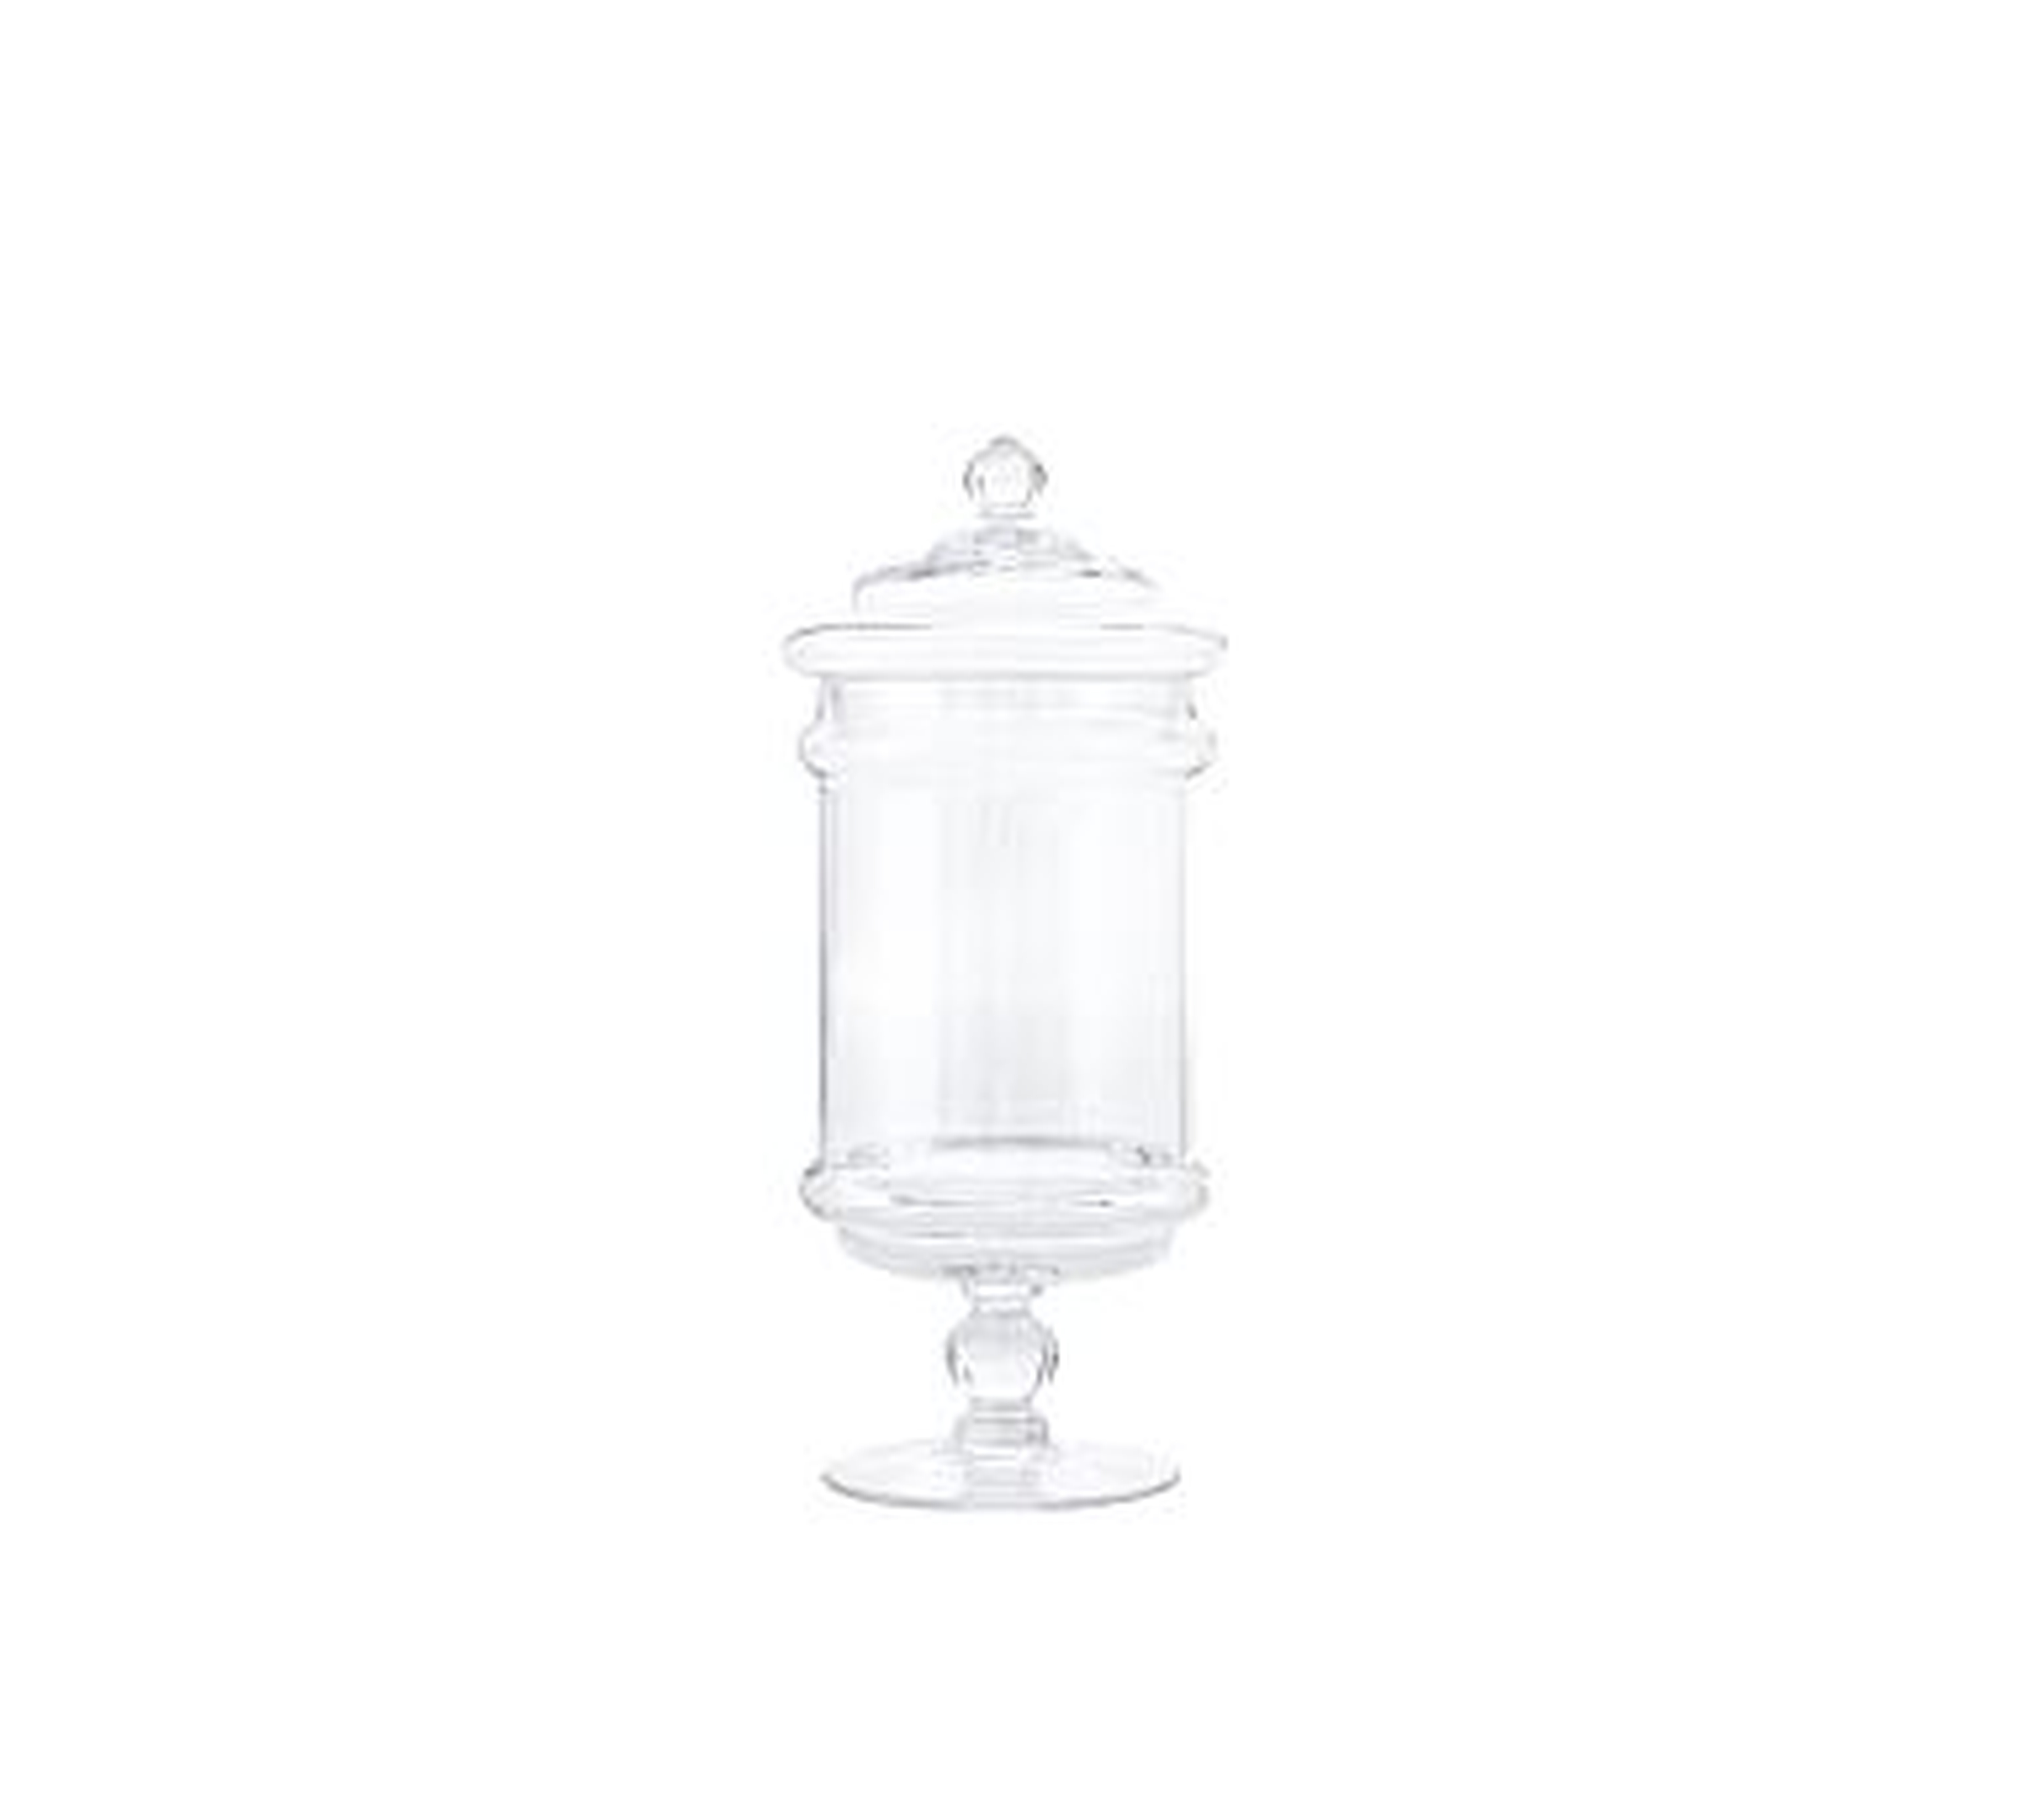 Classic Handcrafted Glass Apothecary Jar, Small - Pottery Barn